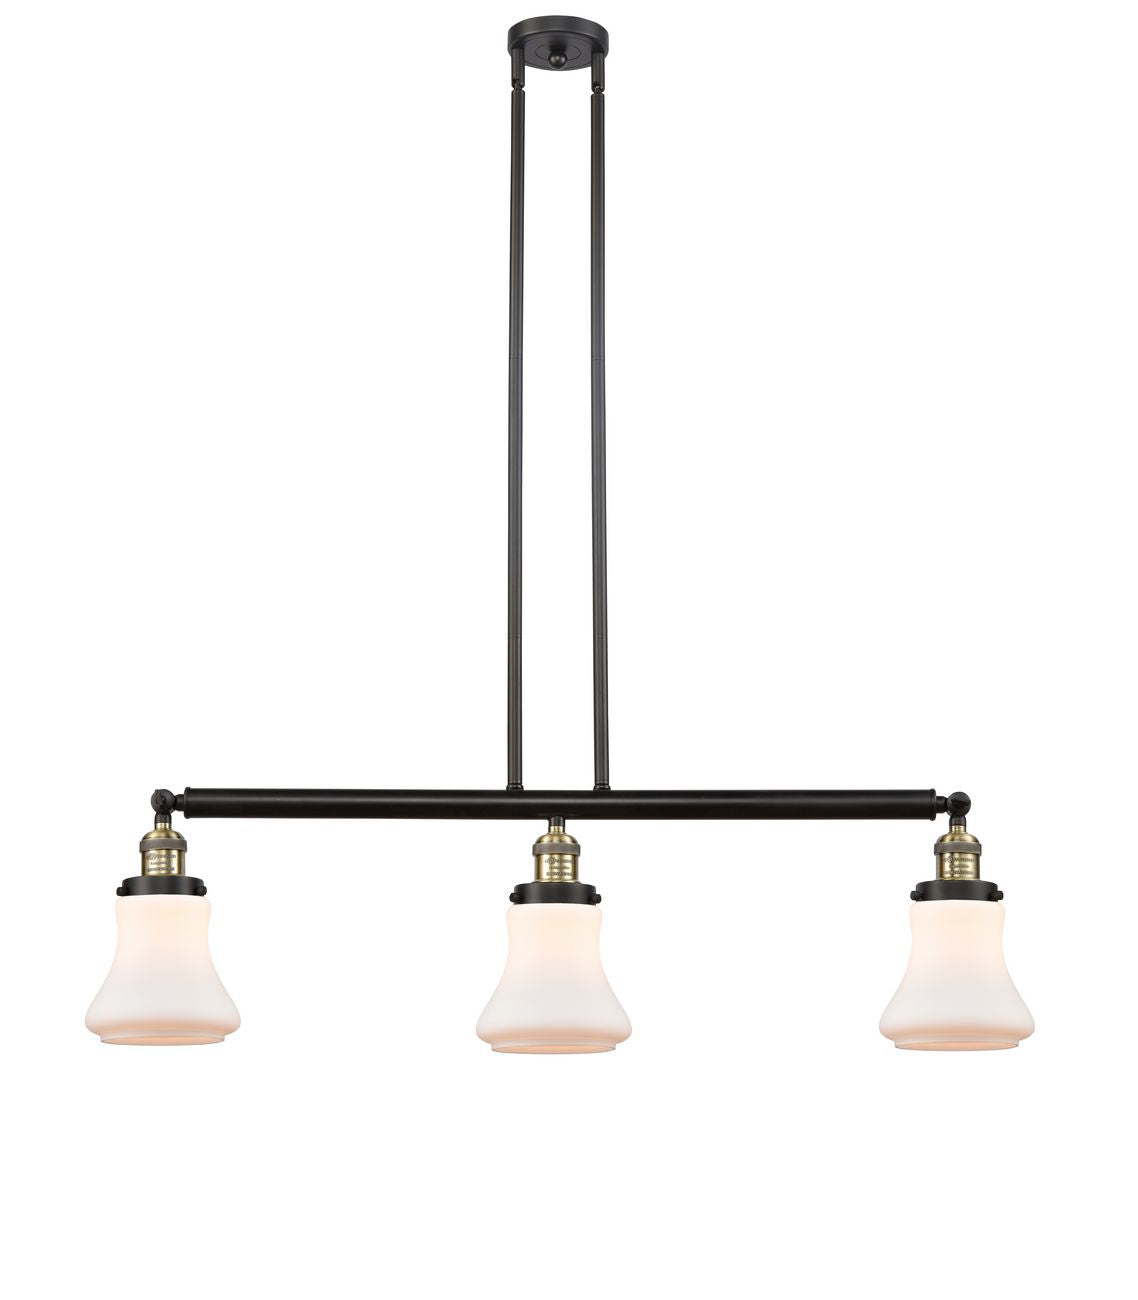 213-BAB-G191 3-Light 38.75" Black Antique Brass Island Light - Matte White Bellmont Glass - LED Bulb - Dimmensions: 38.75 x 6.25 x 11<br>Minimum Height : 20.5<br>Maximum Height : 44.5 - Sloped Ceiling Compatible: Yes